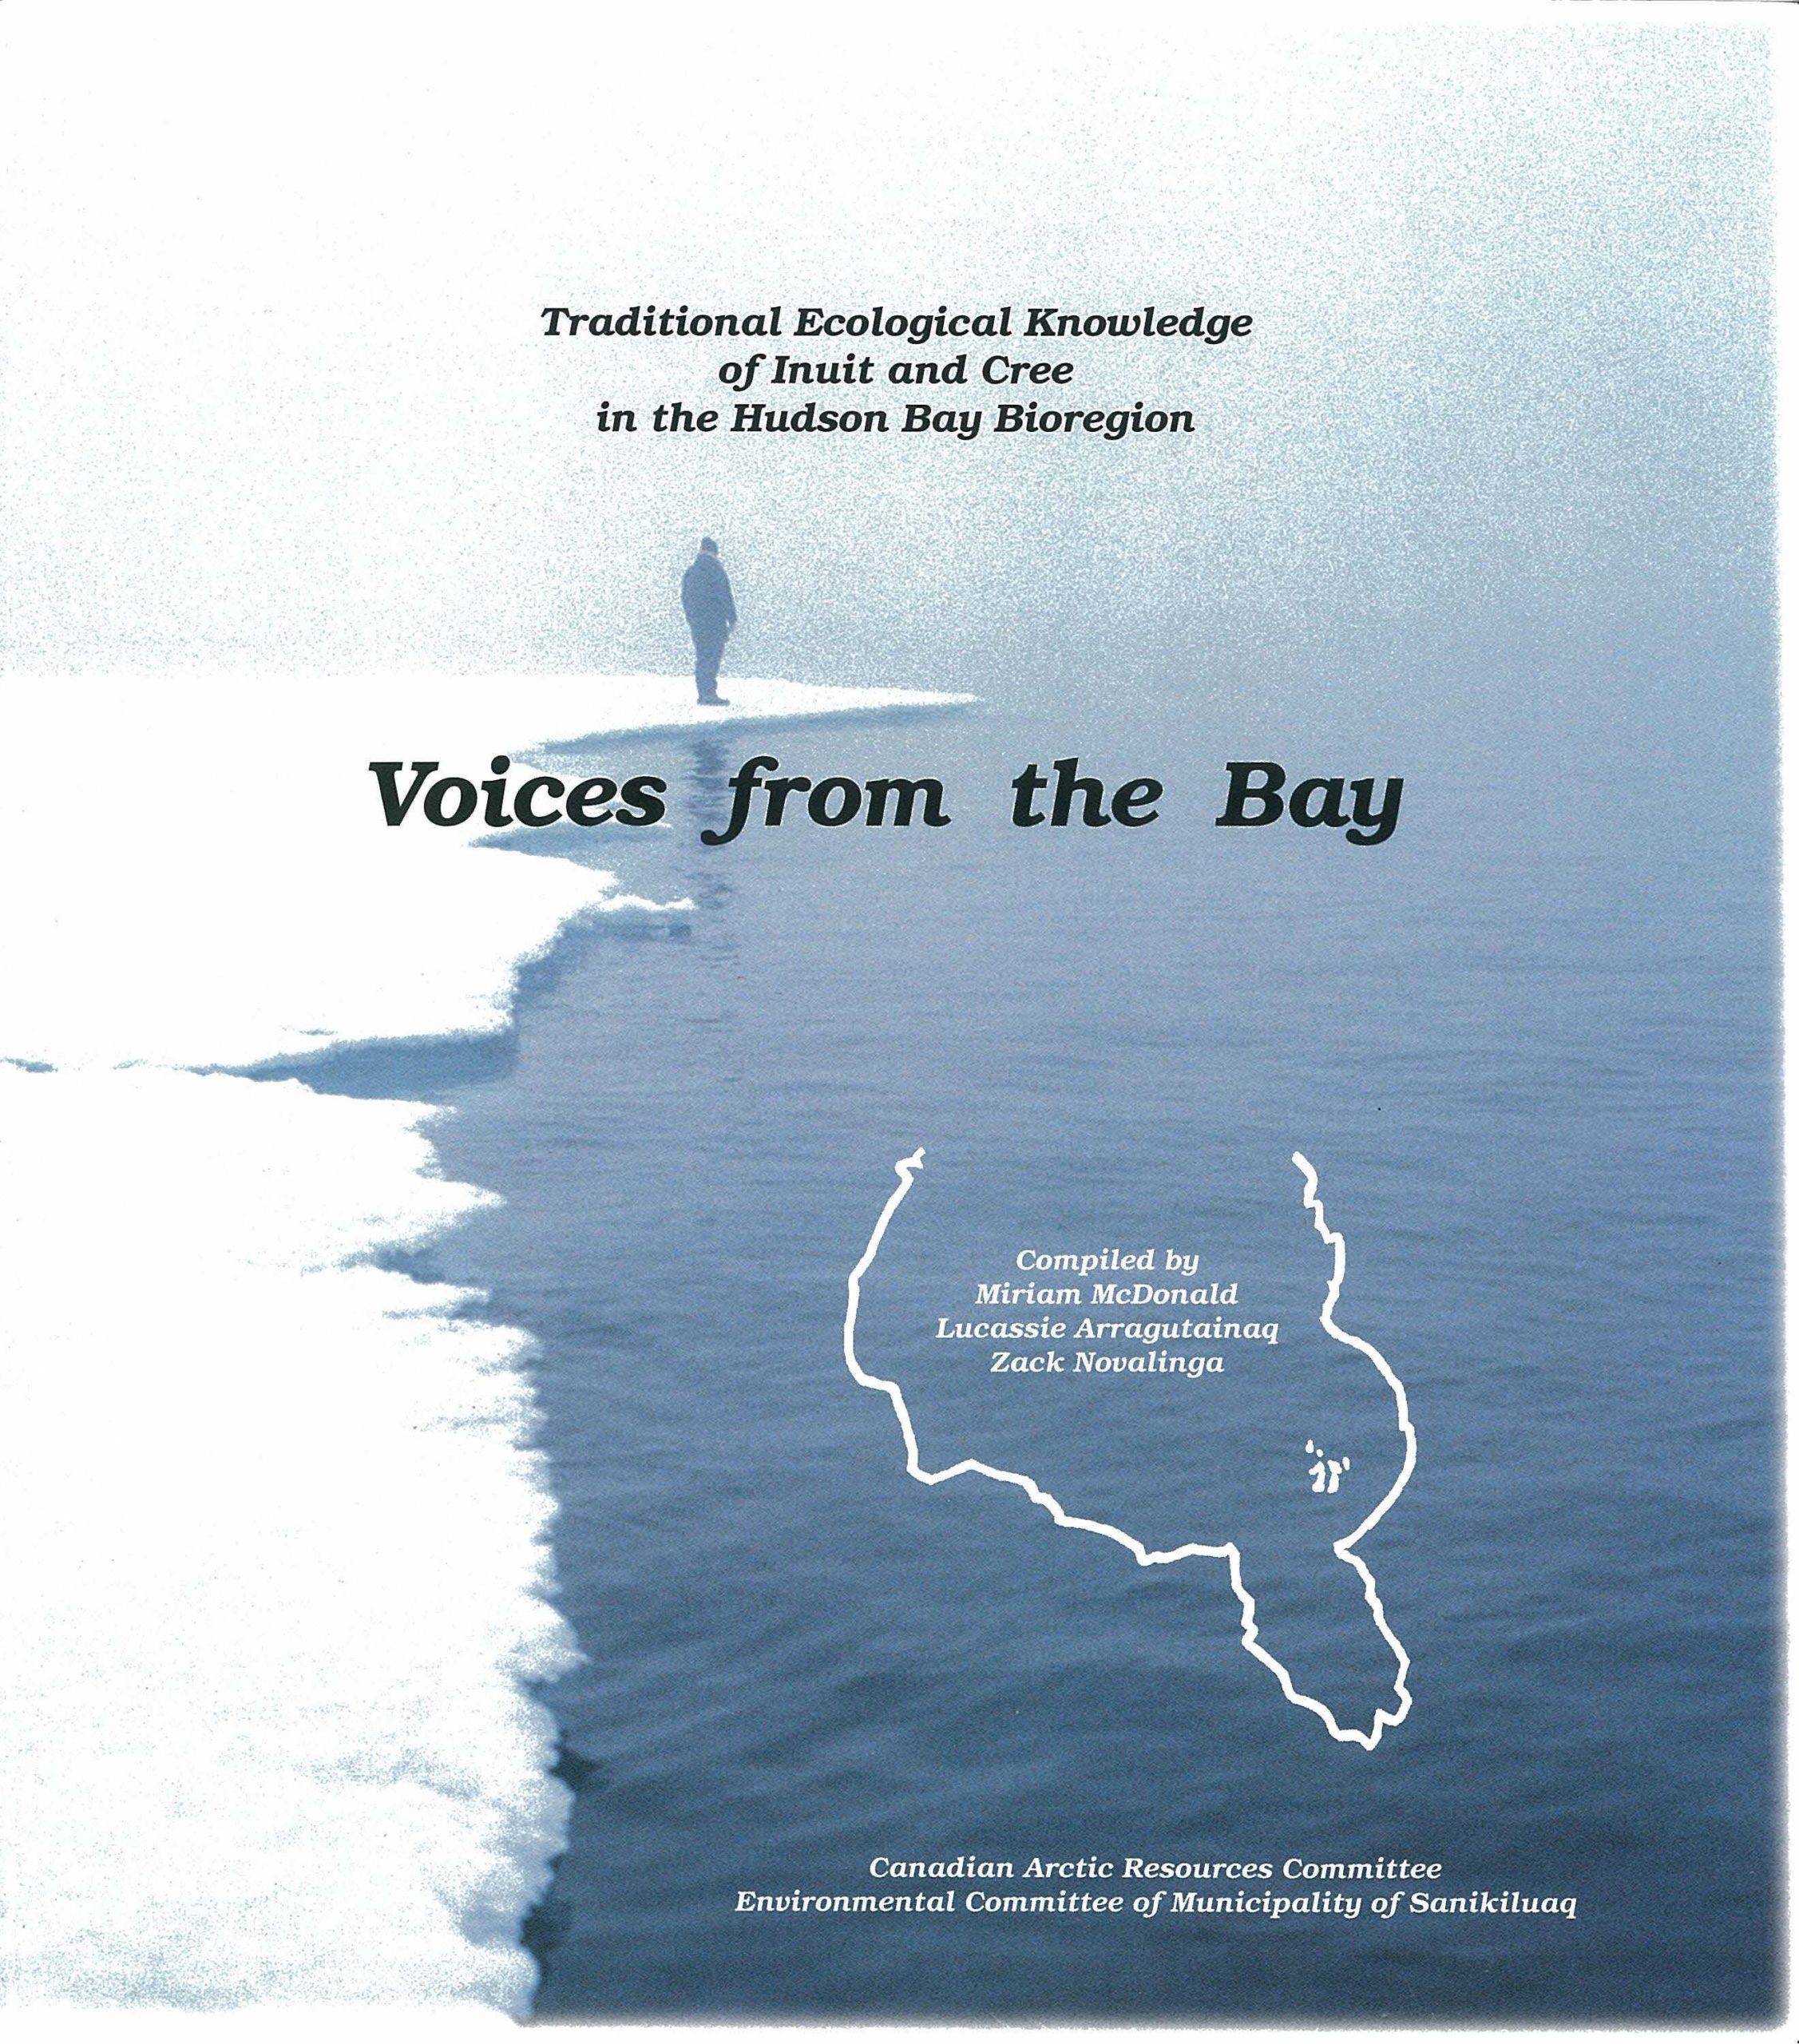 Voices From the Bay: Traditional Ecological Knowledge of Inuit and